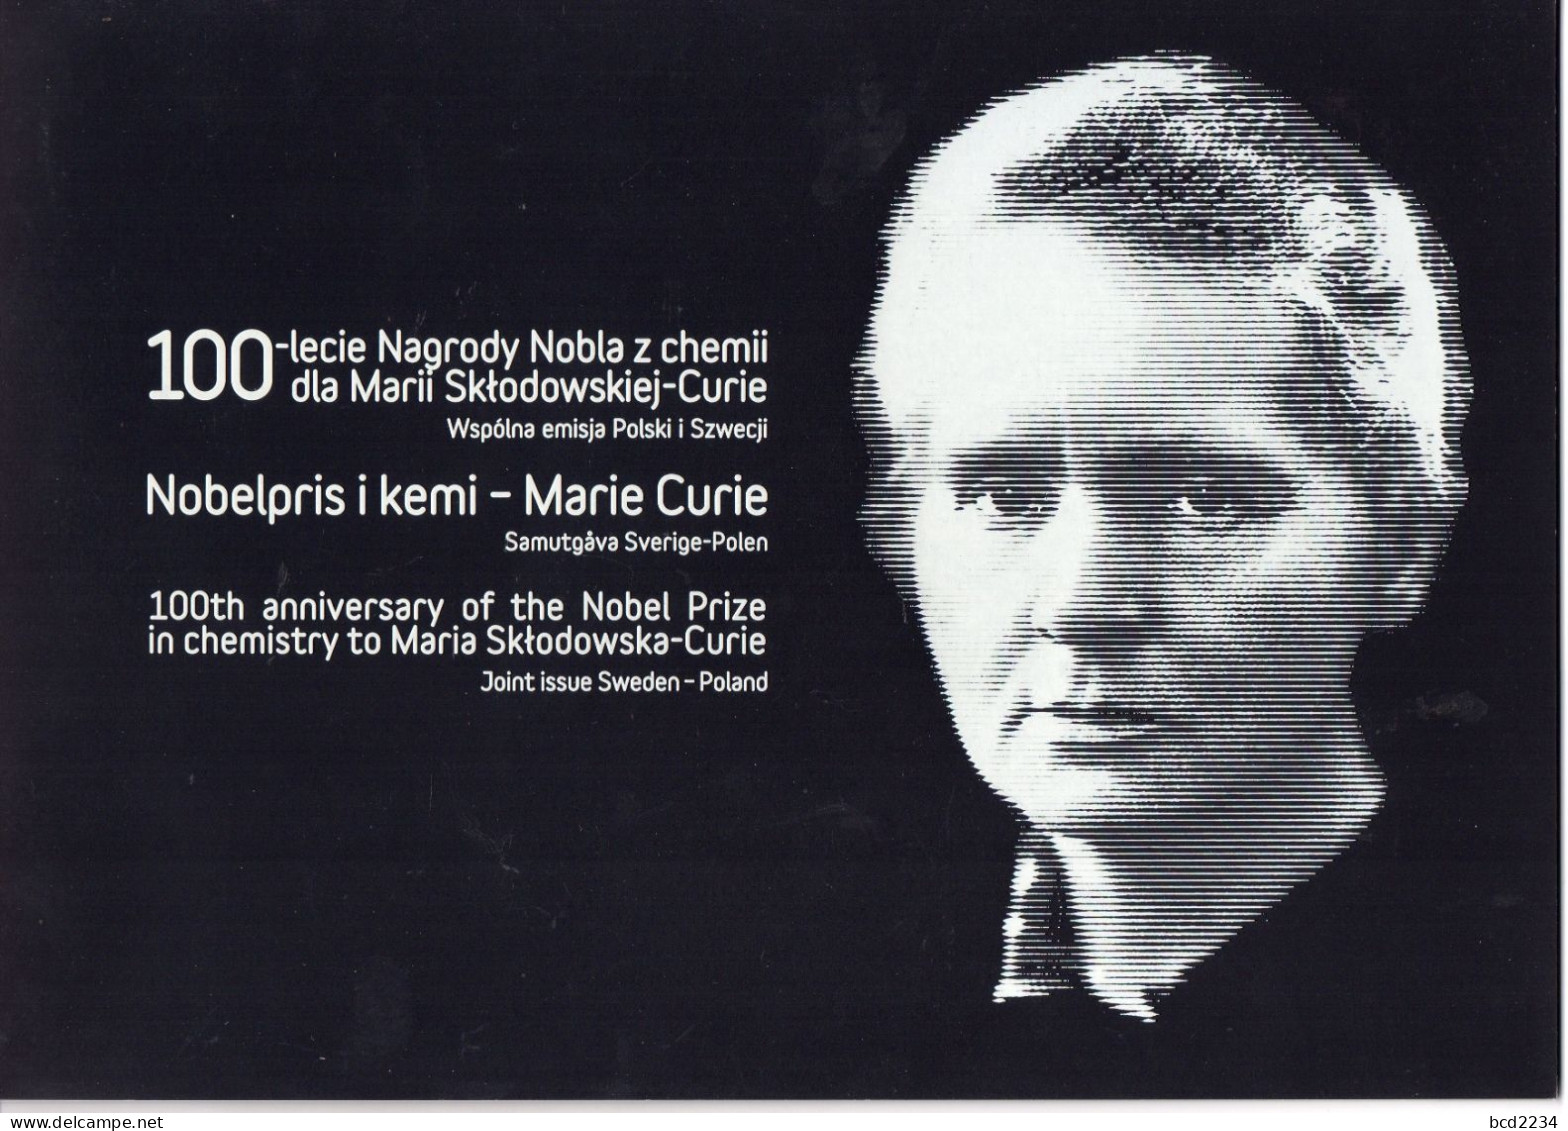 POLAND 2011 LIMITED EDITION: RARE 100TH ANNIVERSARY MARIE CURIE NOBEL PRIZE CHEMISTRY FOLDER FDC MS PL SWEDEN - Blocs-feuillets